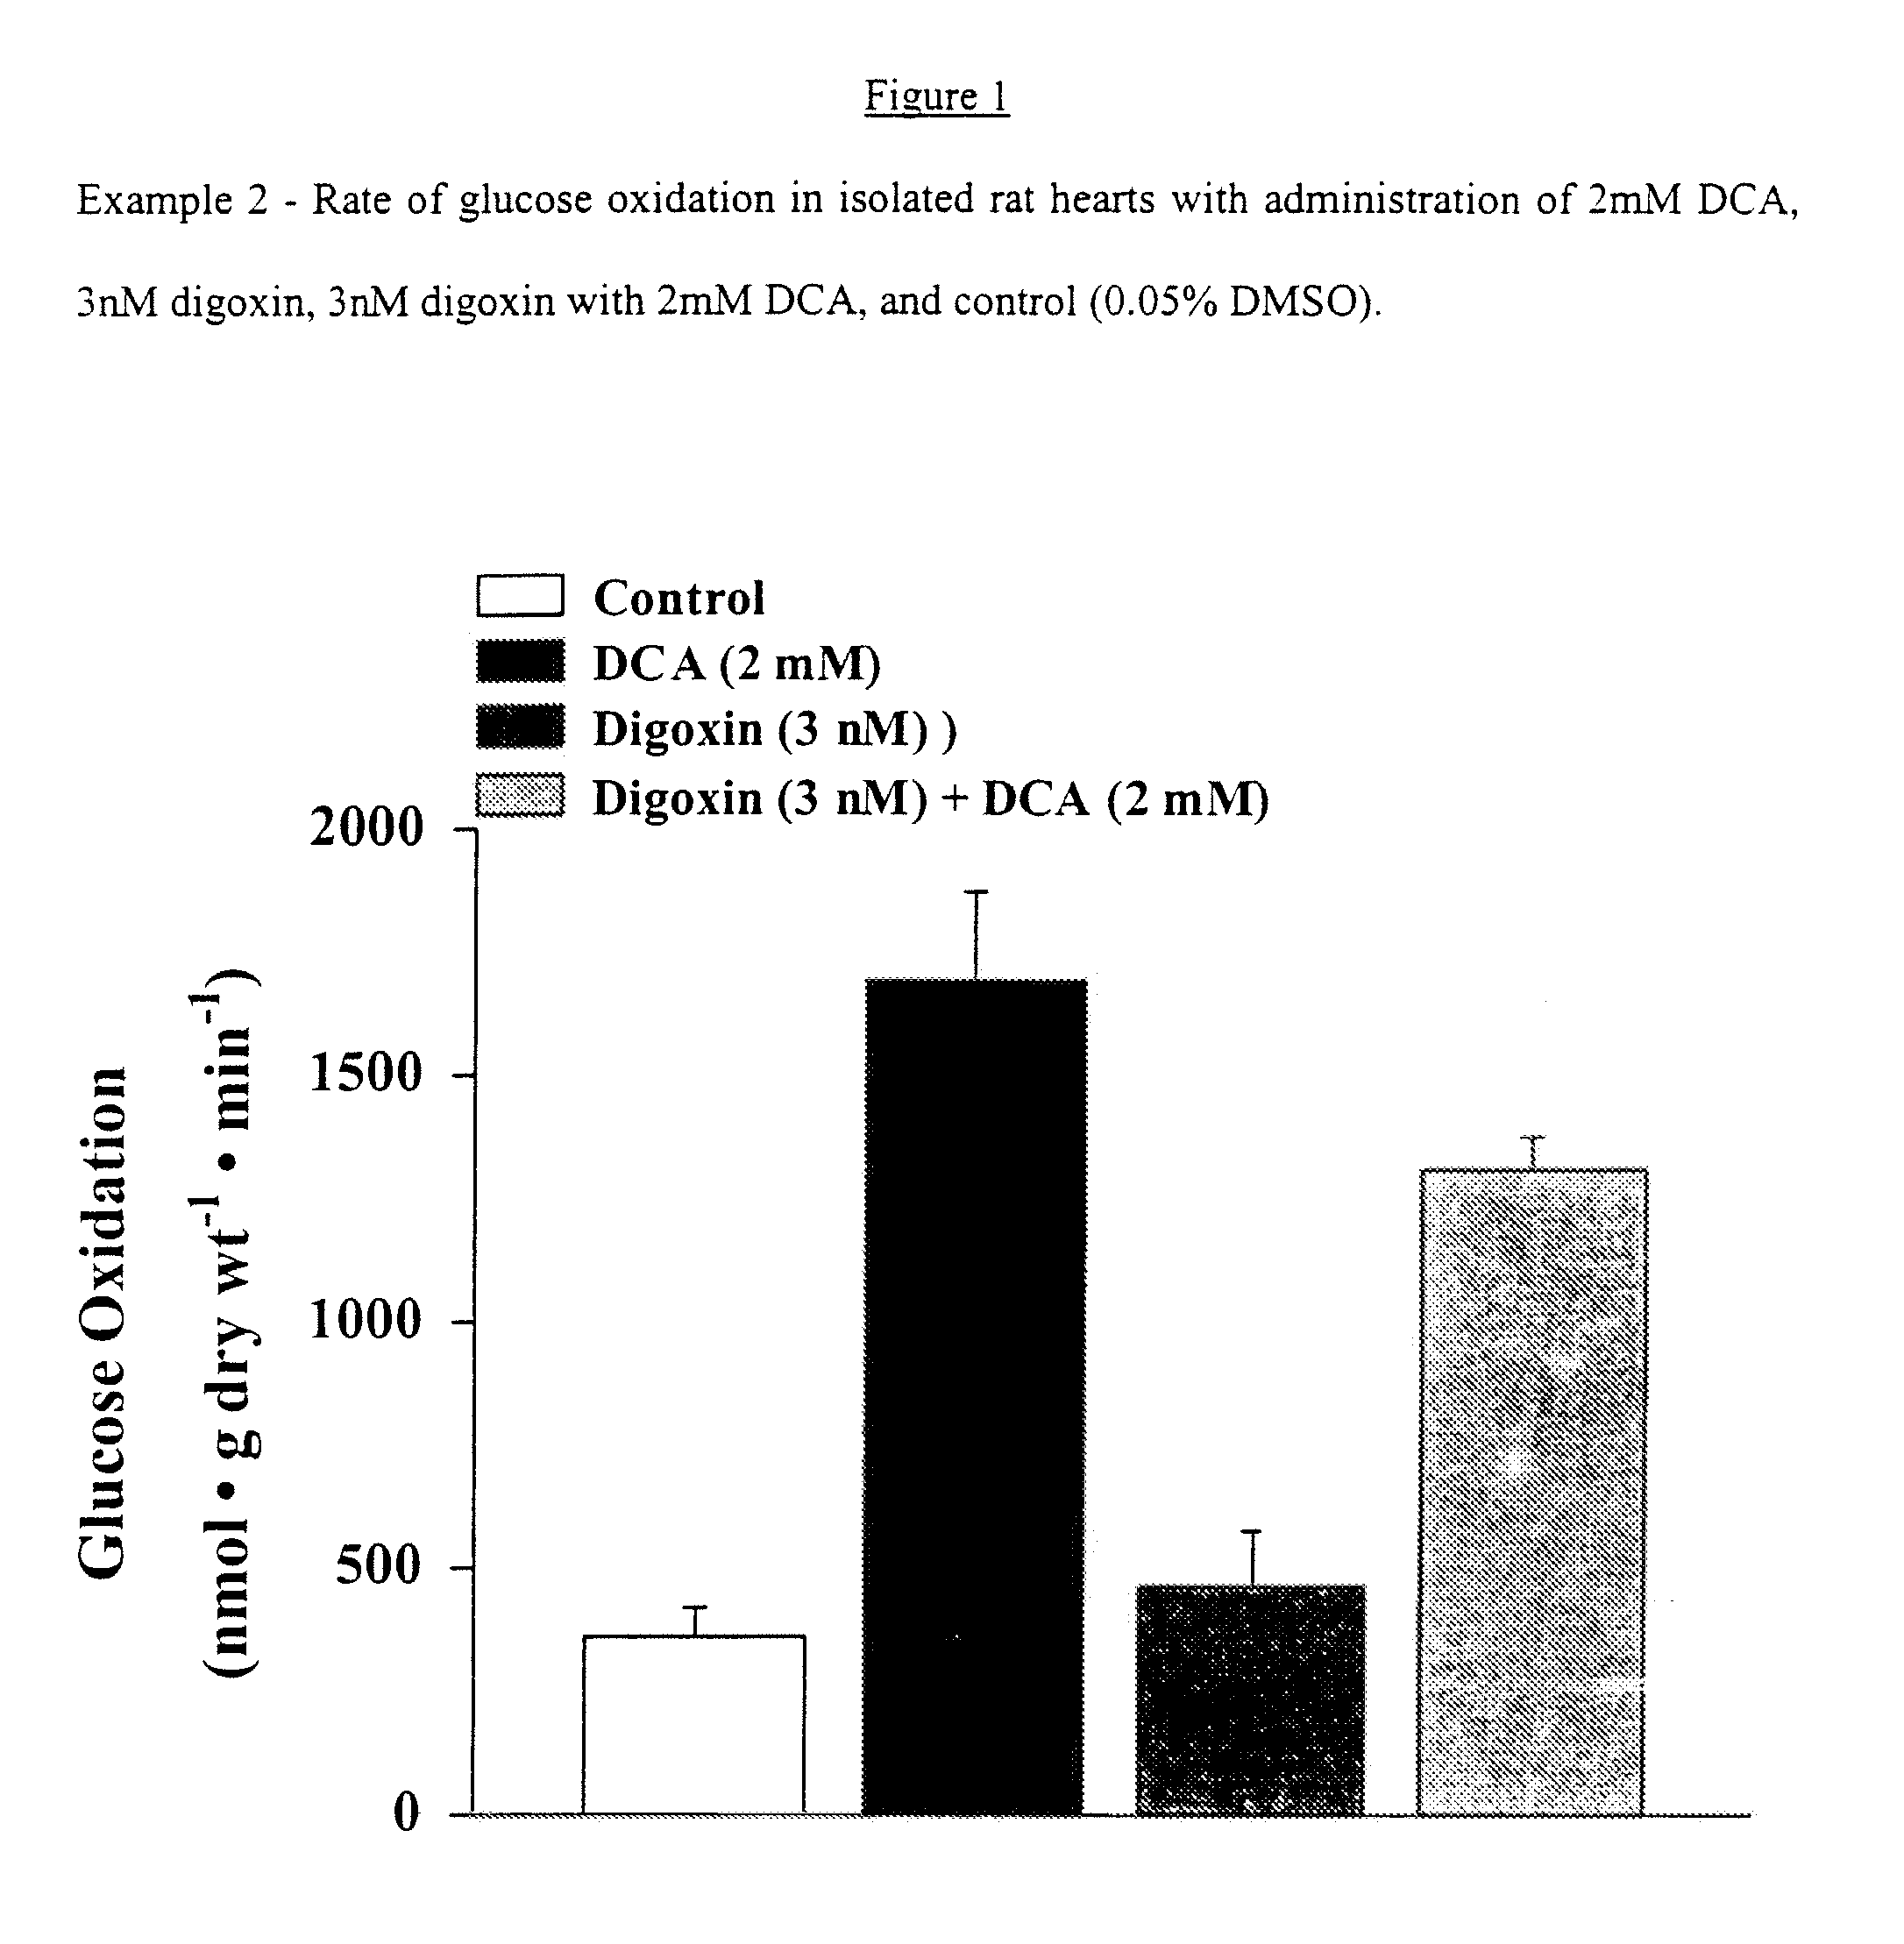 Dichloracetate in combination with clinically high levels of cardioprotective or hemodynamic drugs